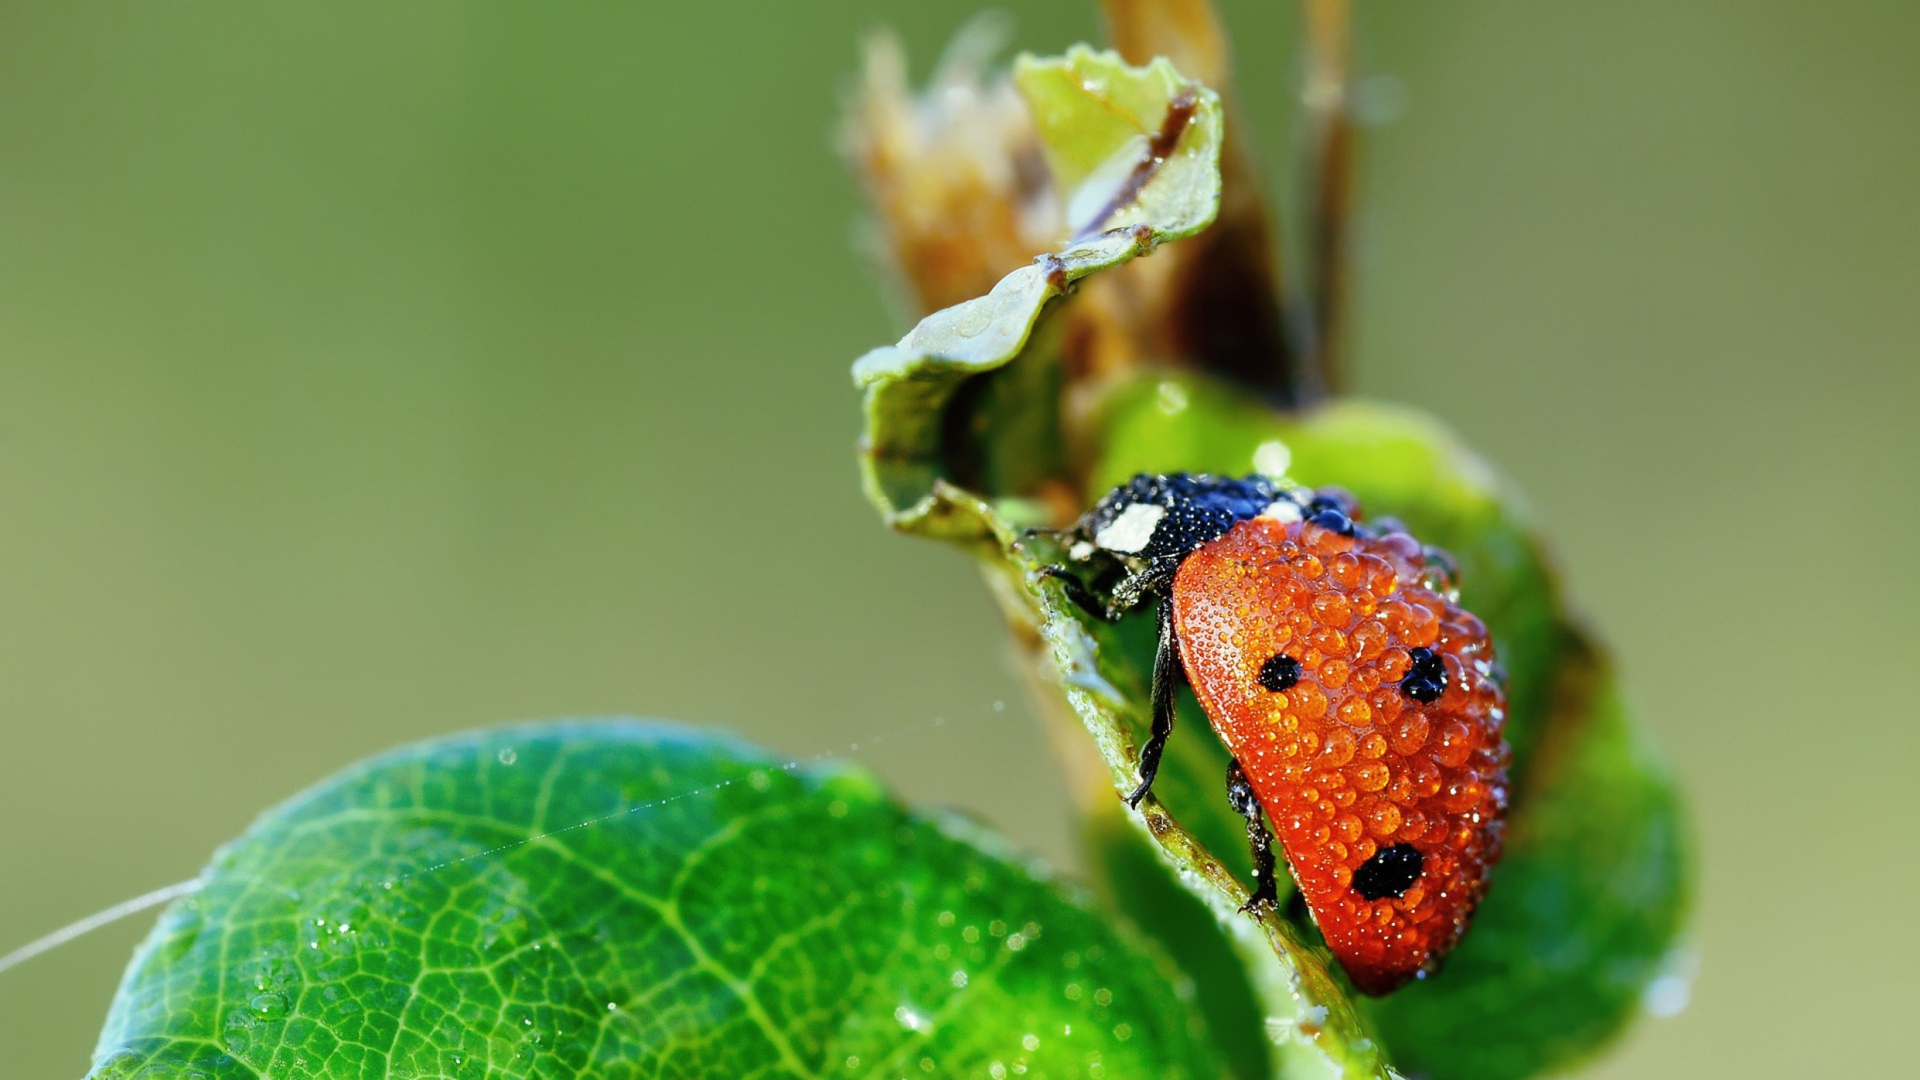 Das Ladybug Covered With Dew Drops Wallpaper 1920x1080